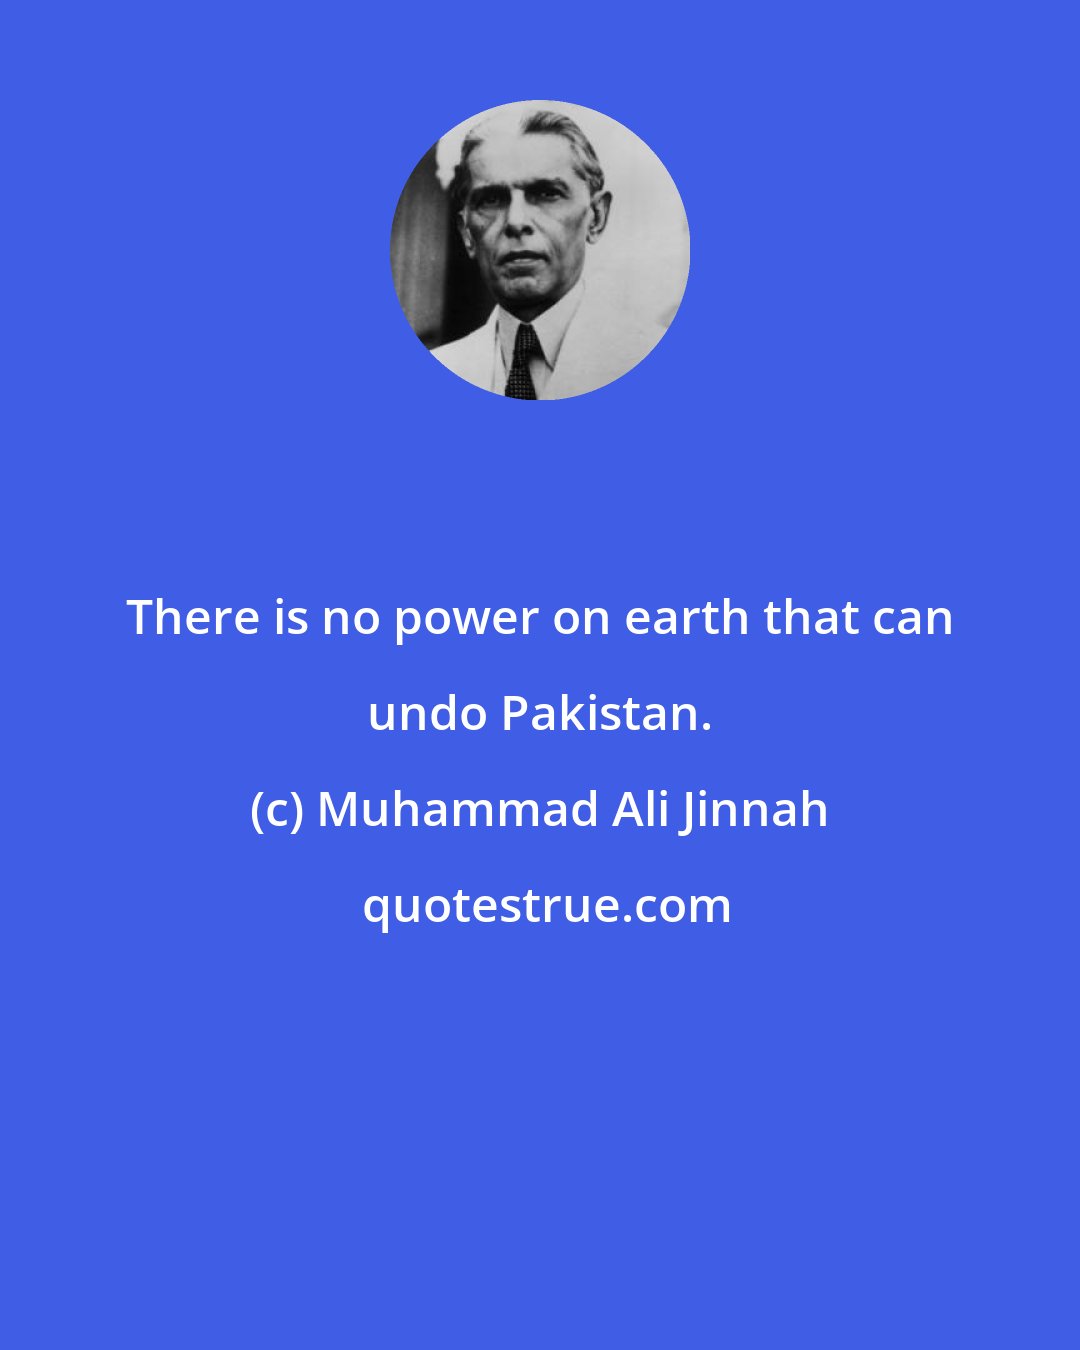 Muhammad Ali Jinnah: There is no power on earth that can undo Pakistan.